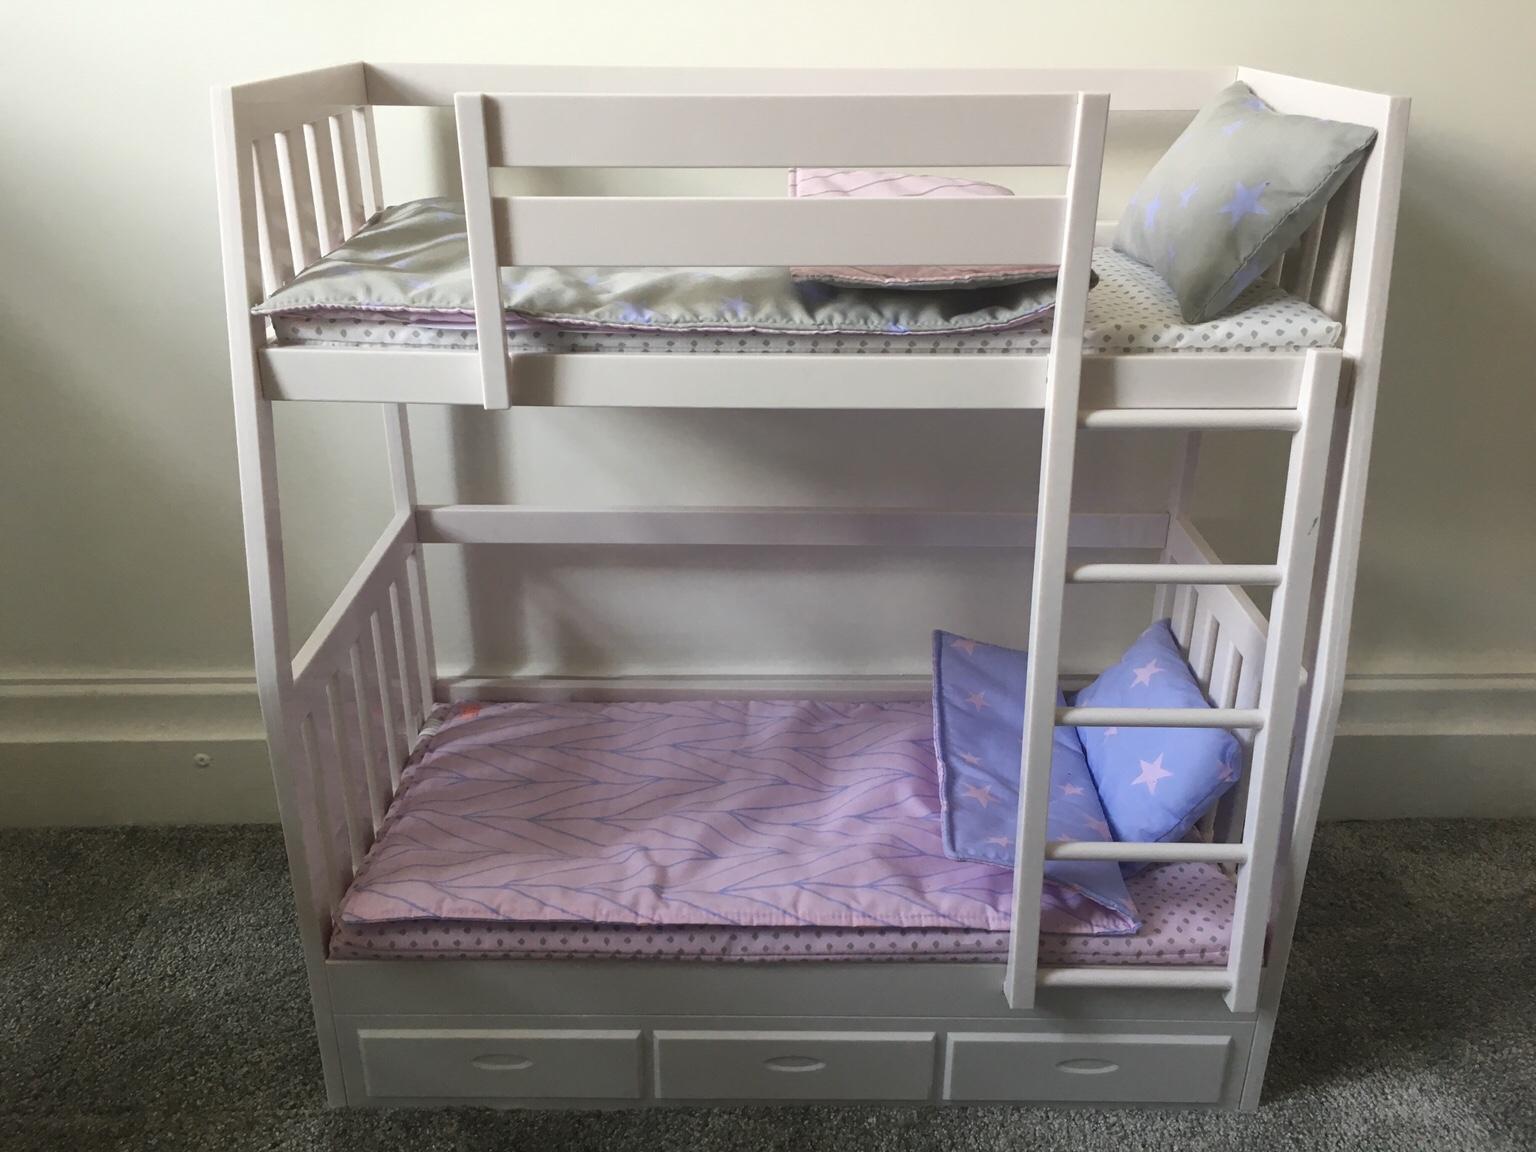 Our Generation Dream Bunk Beds In St, Our Generation Bunk Bed Uk